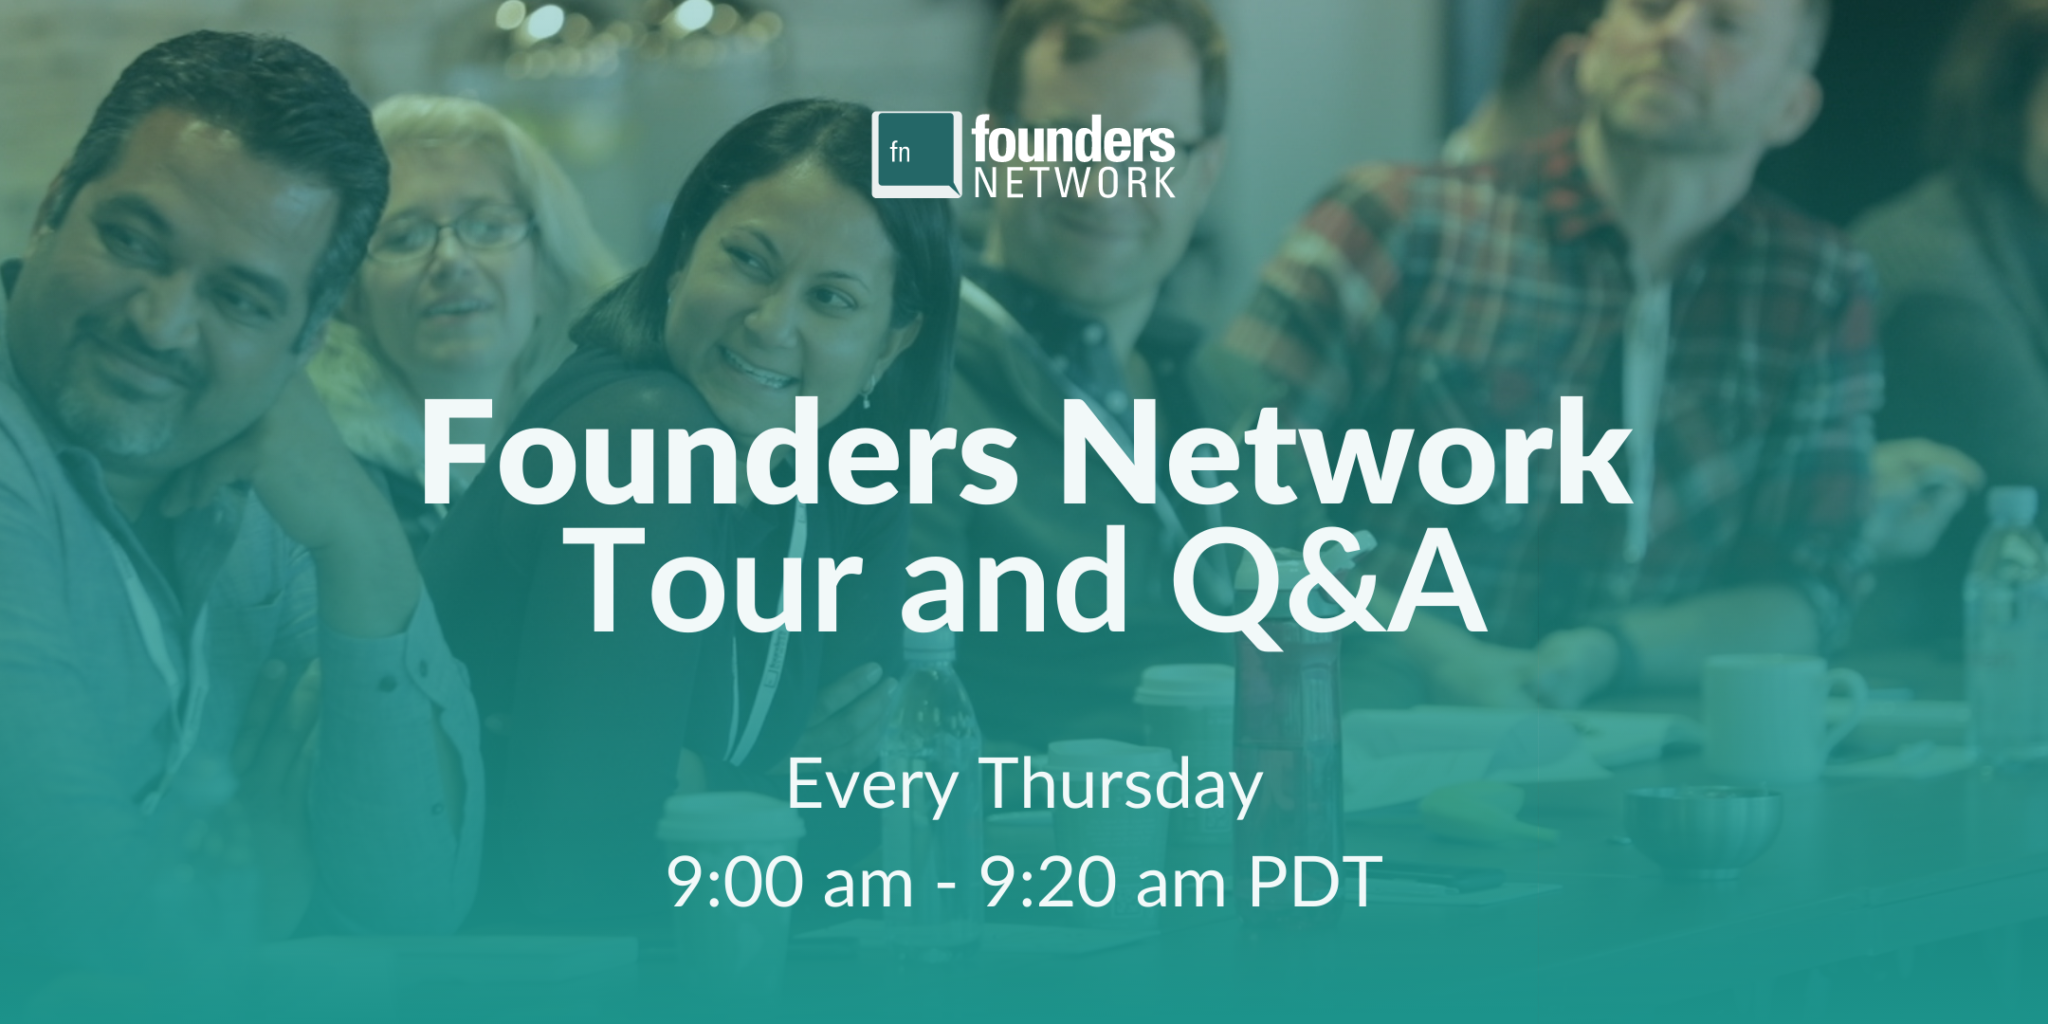 Founders Network Tour and Q&A